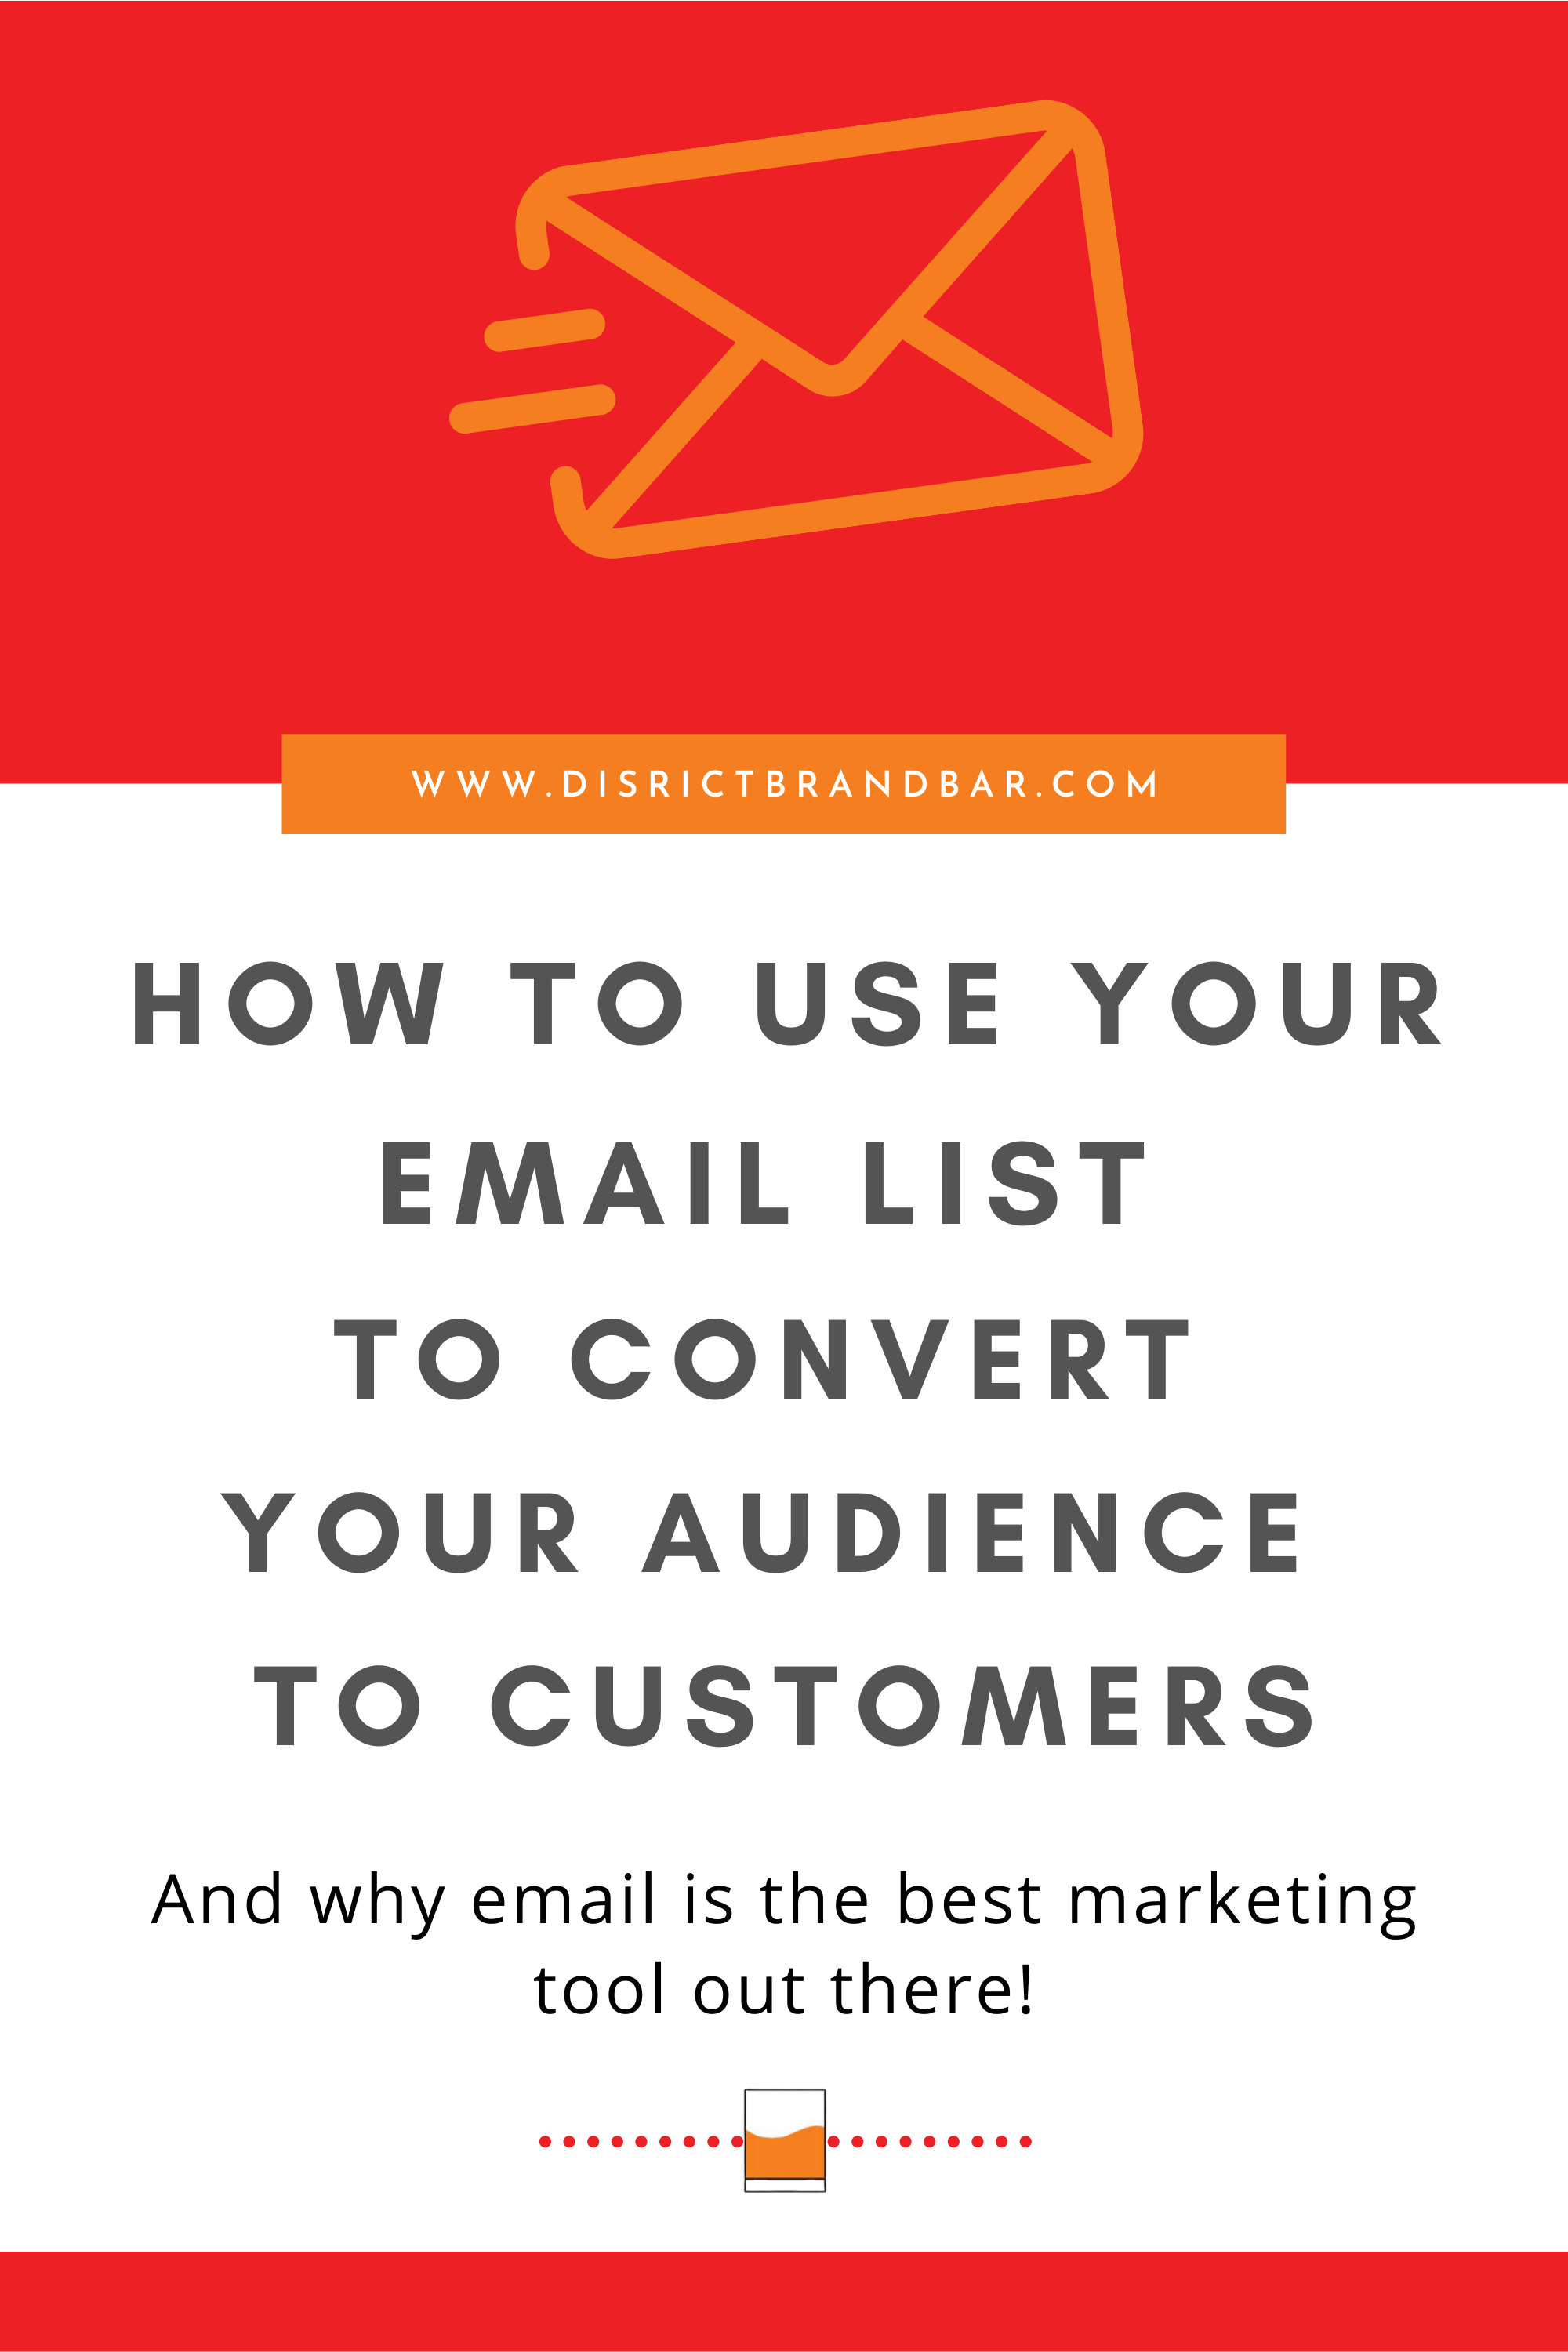 Convert your email list!